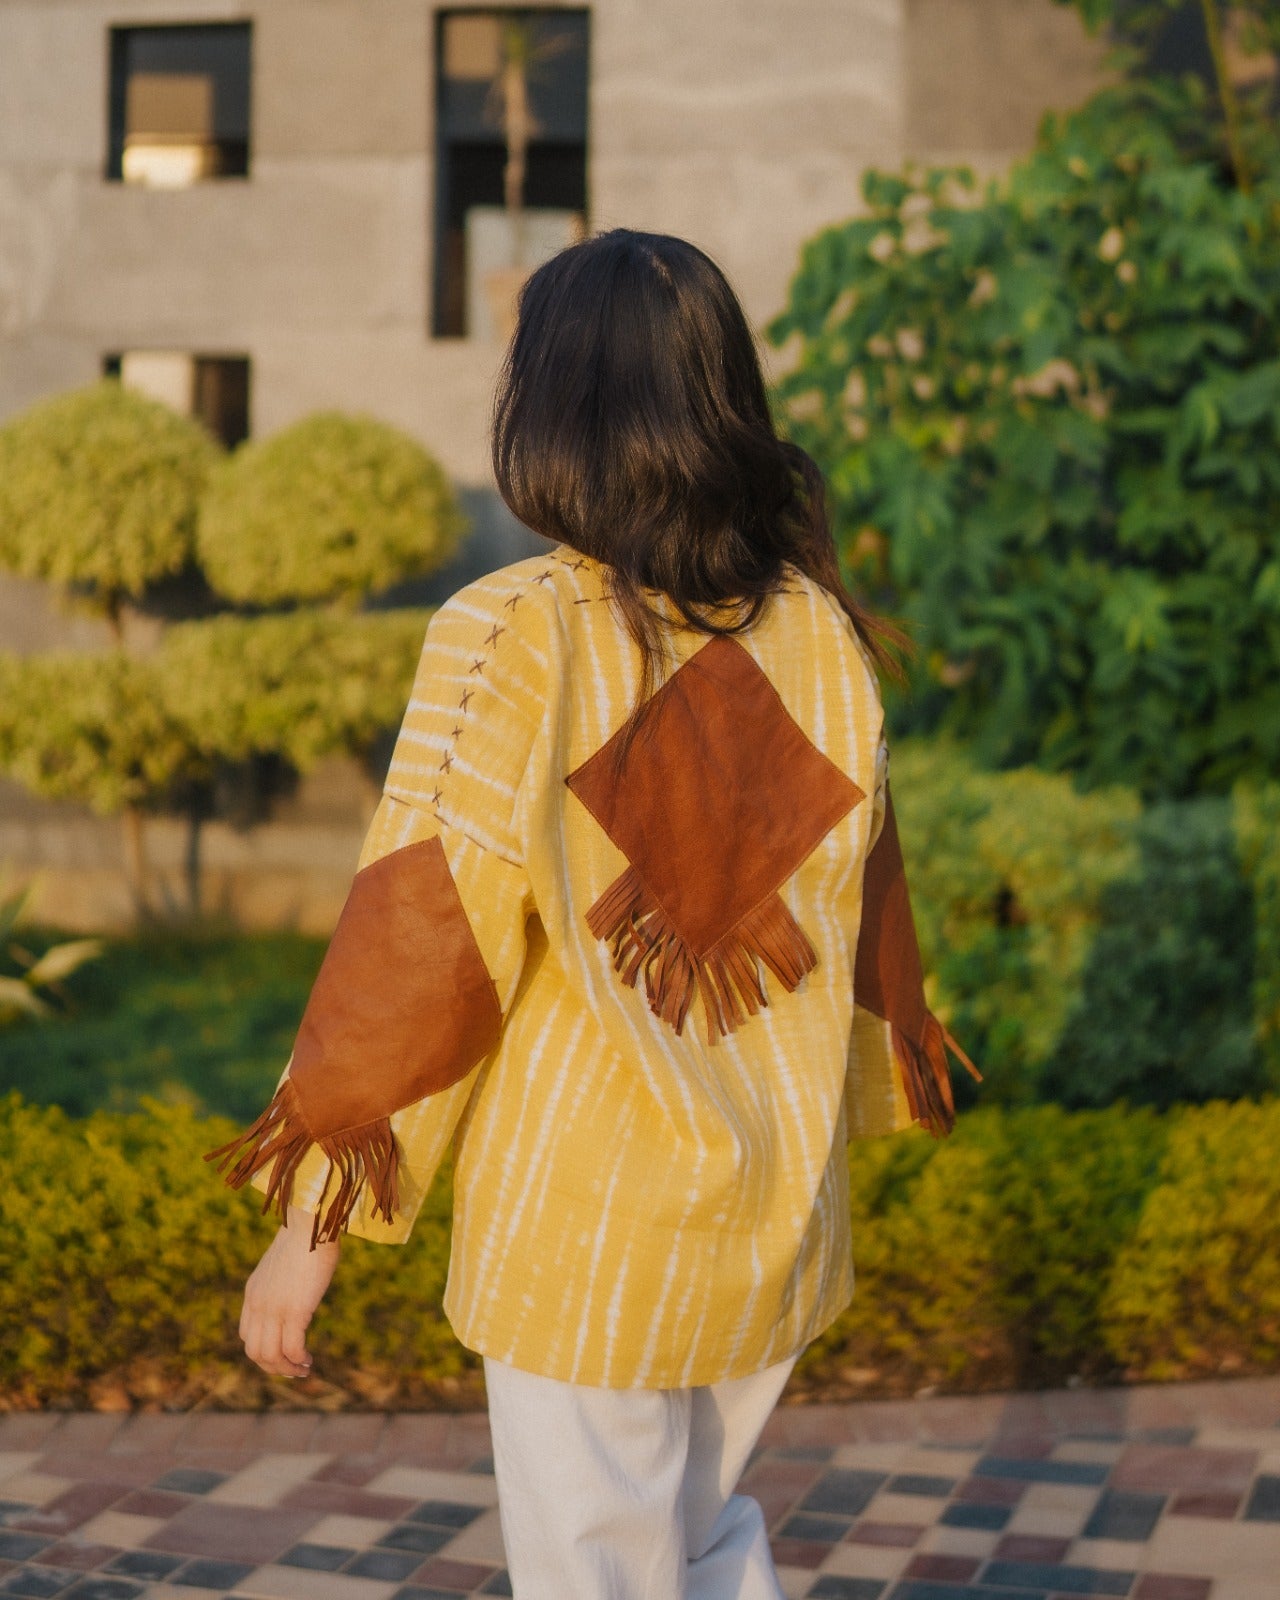 Lemon Yellow Handmade Cardigan with Brown Leather Accents